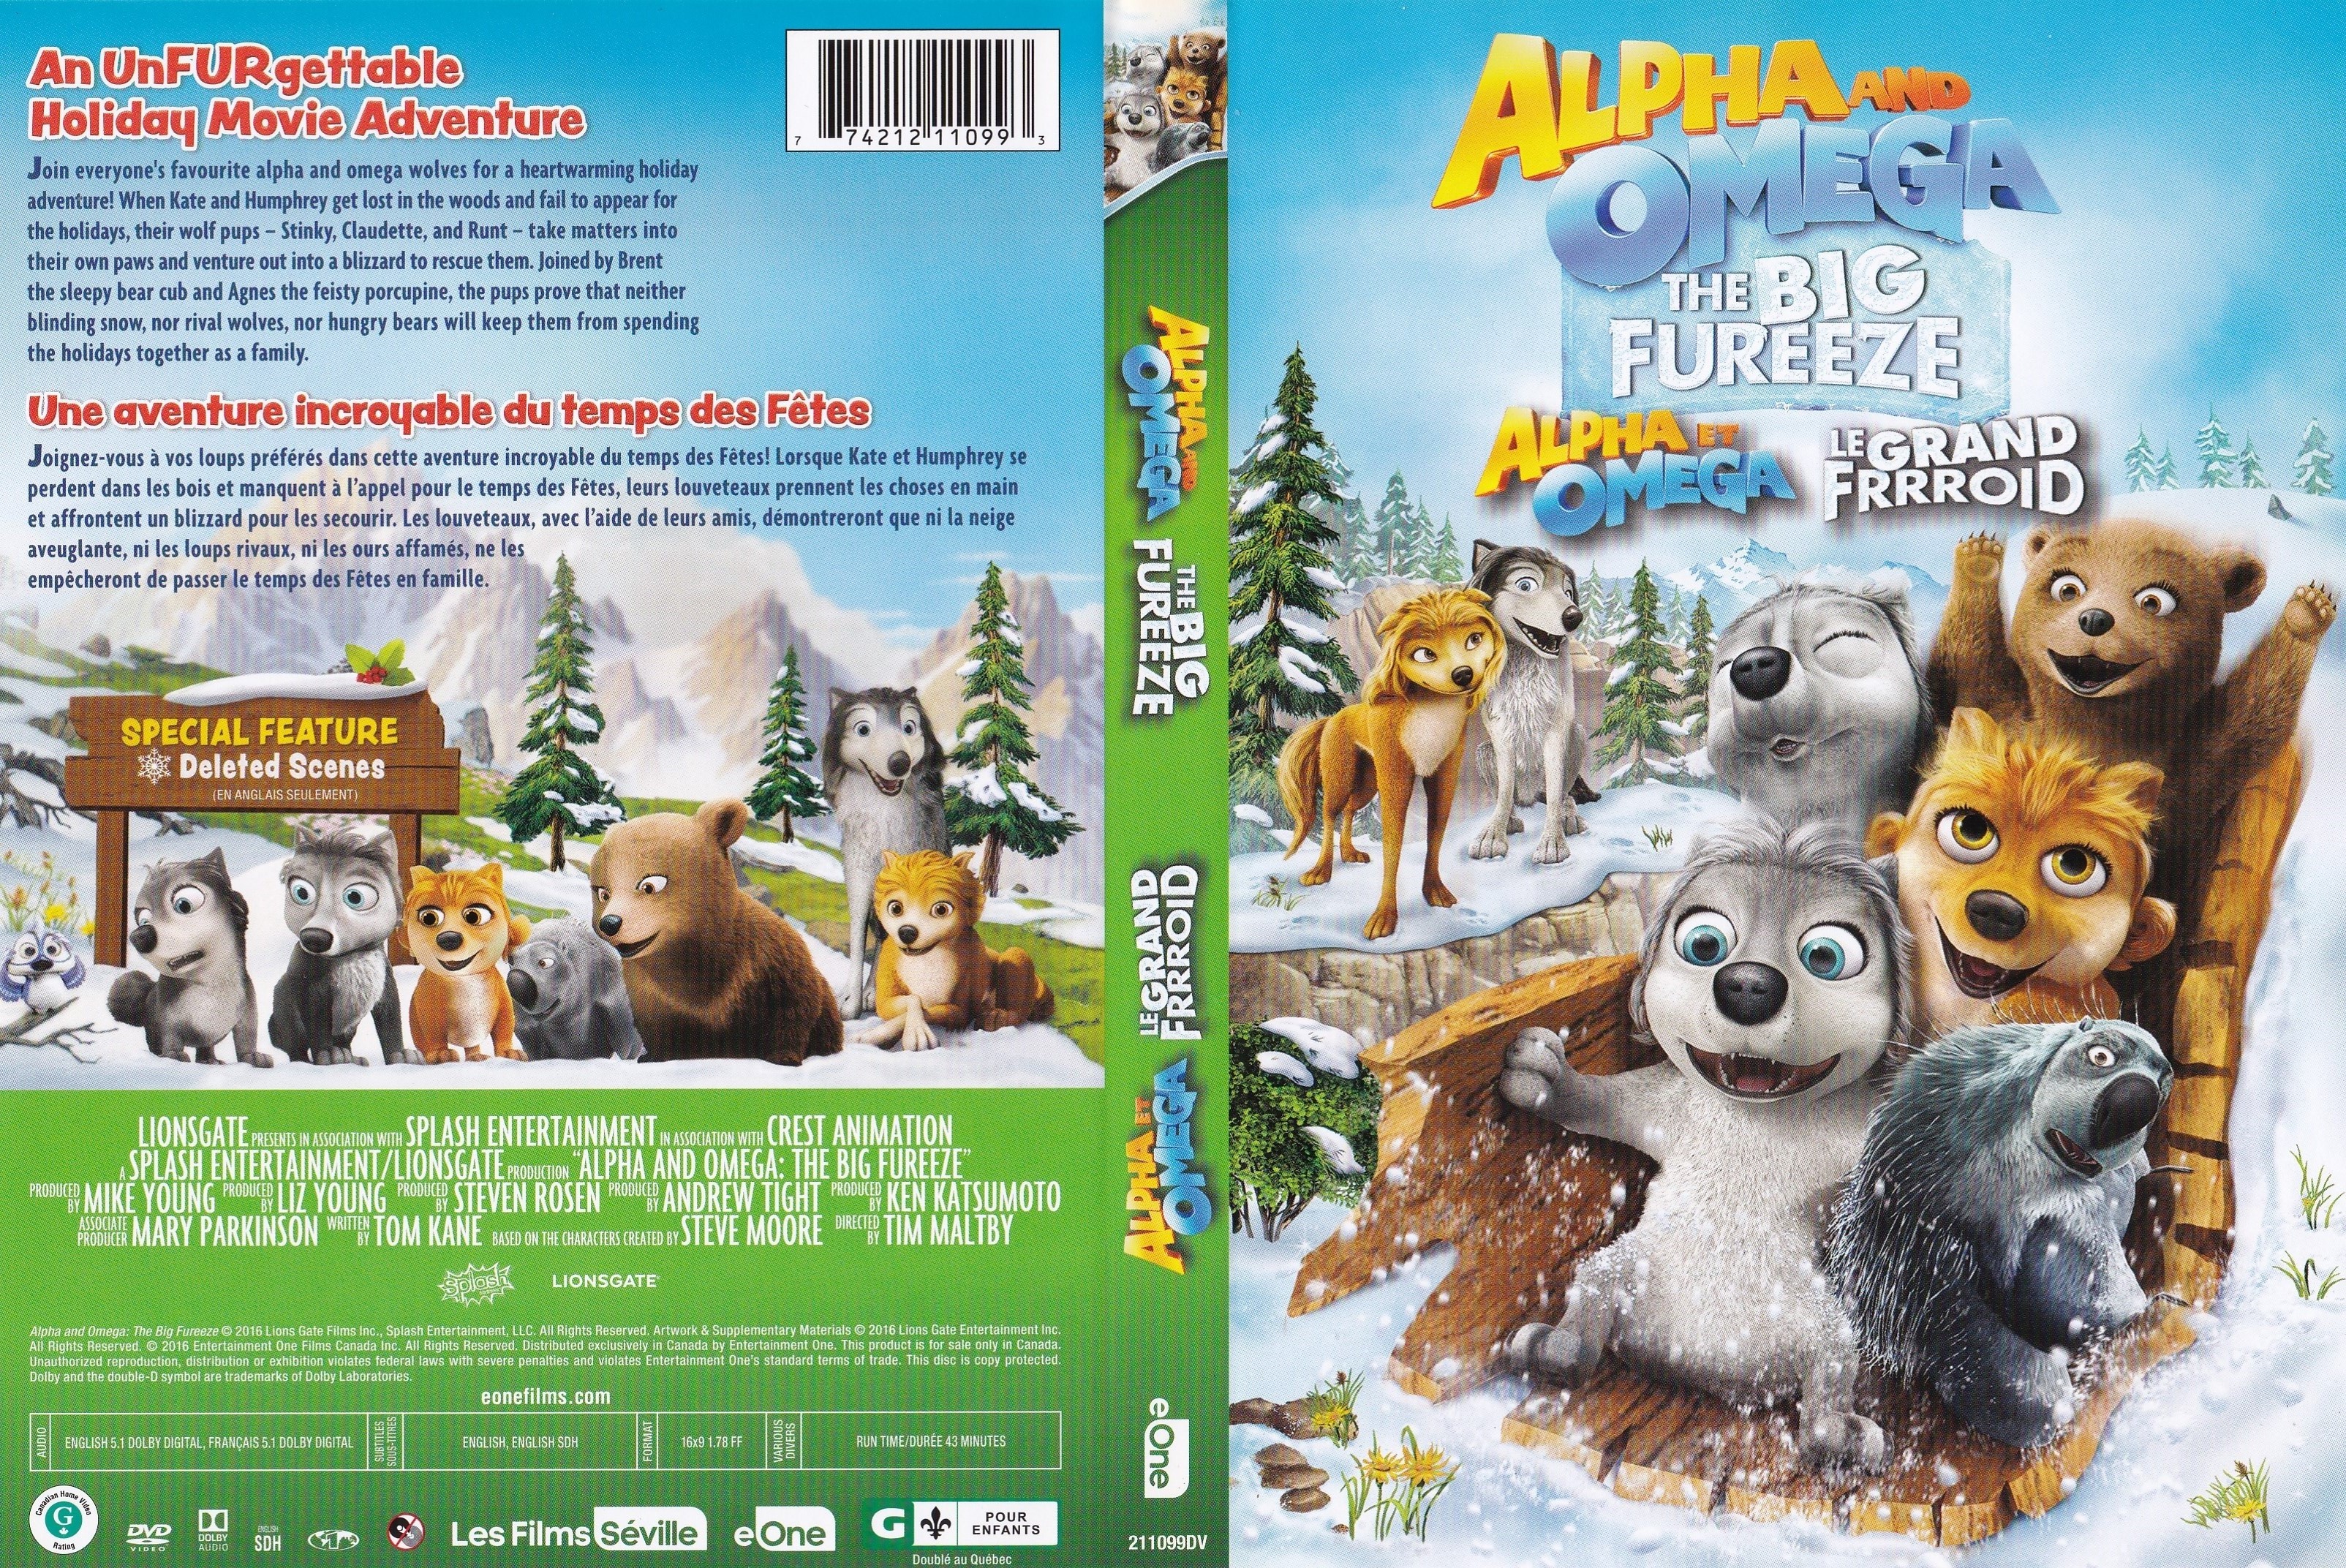 Jaquette DVD Alpha et Omega 2 Le grand frrroid (canadienne)